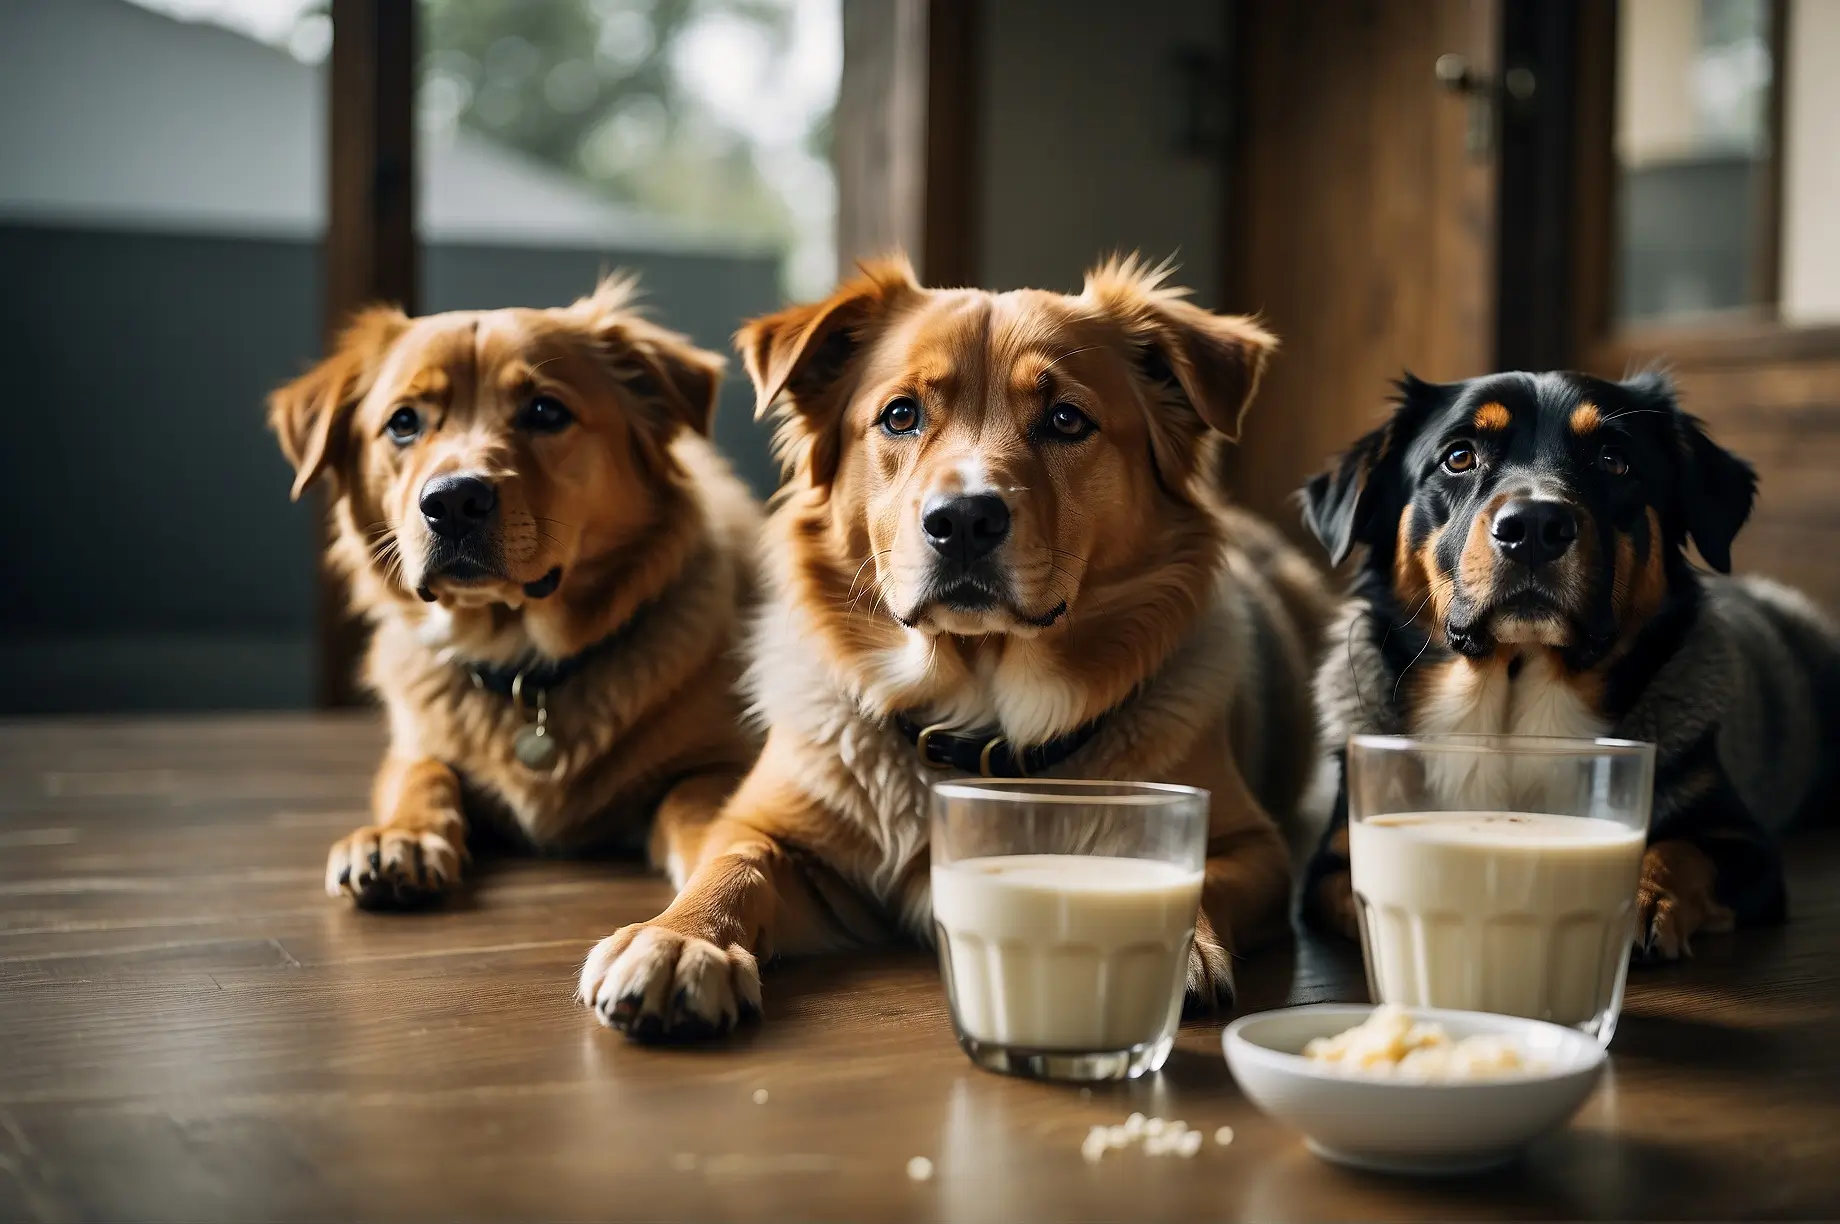 Can dogs drink oatmeal milk?